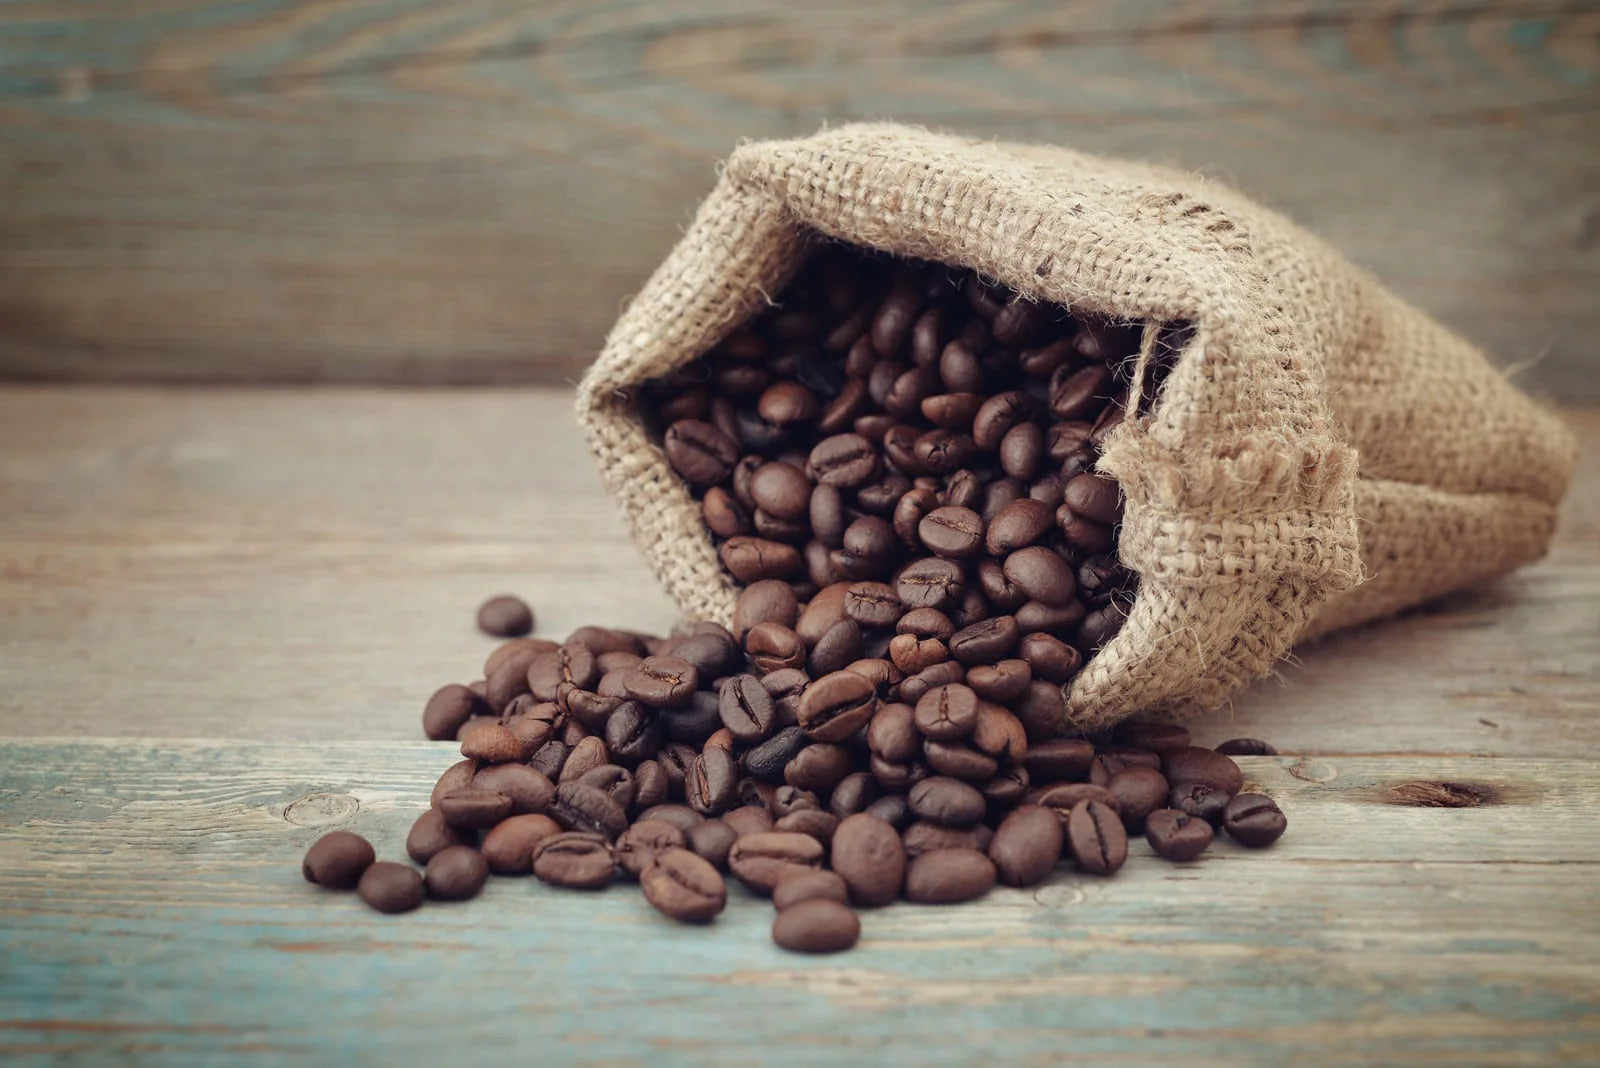 21 Fun Facts about Coffee